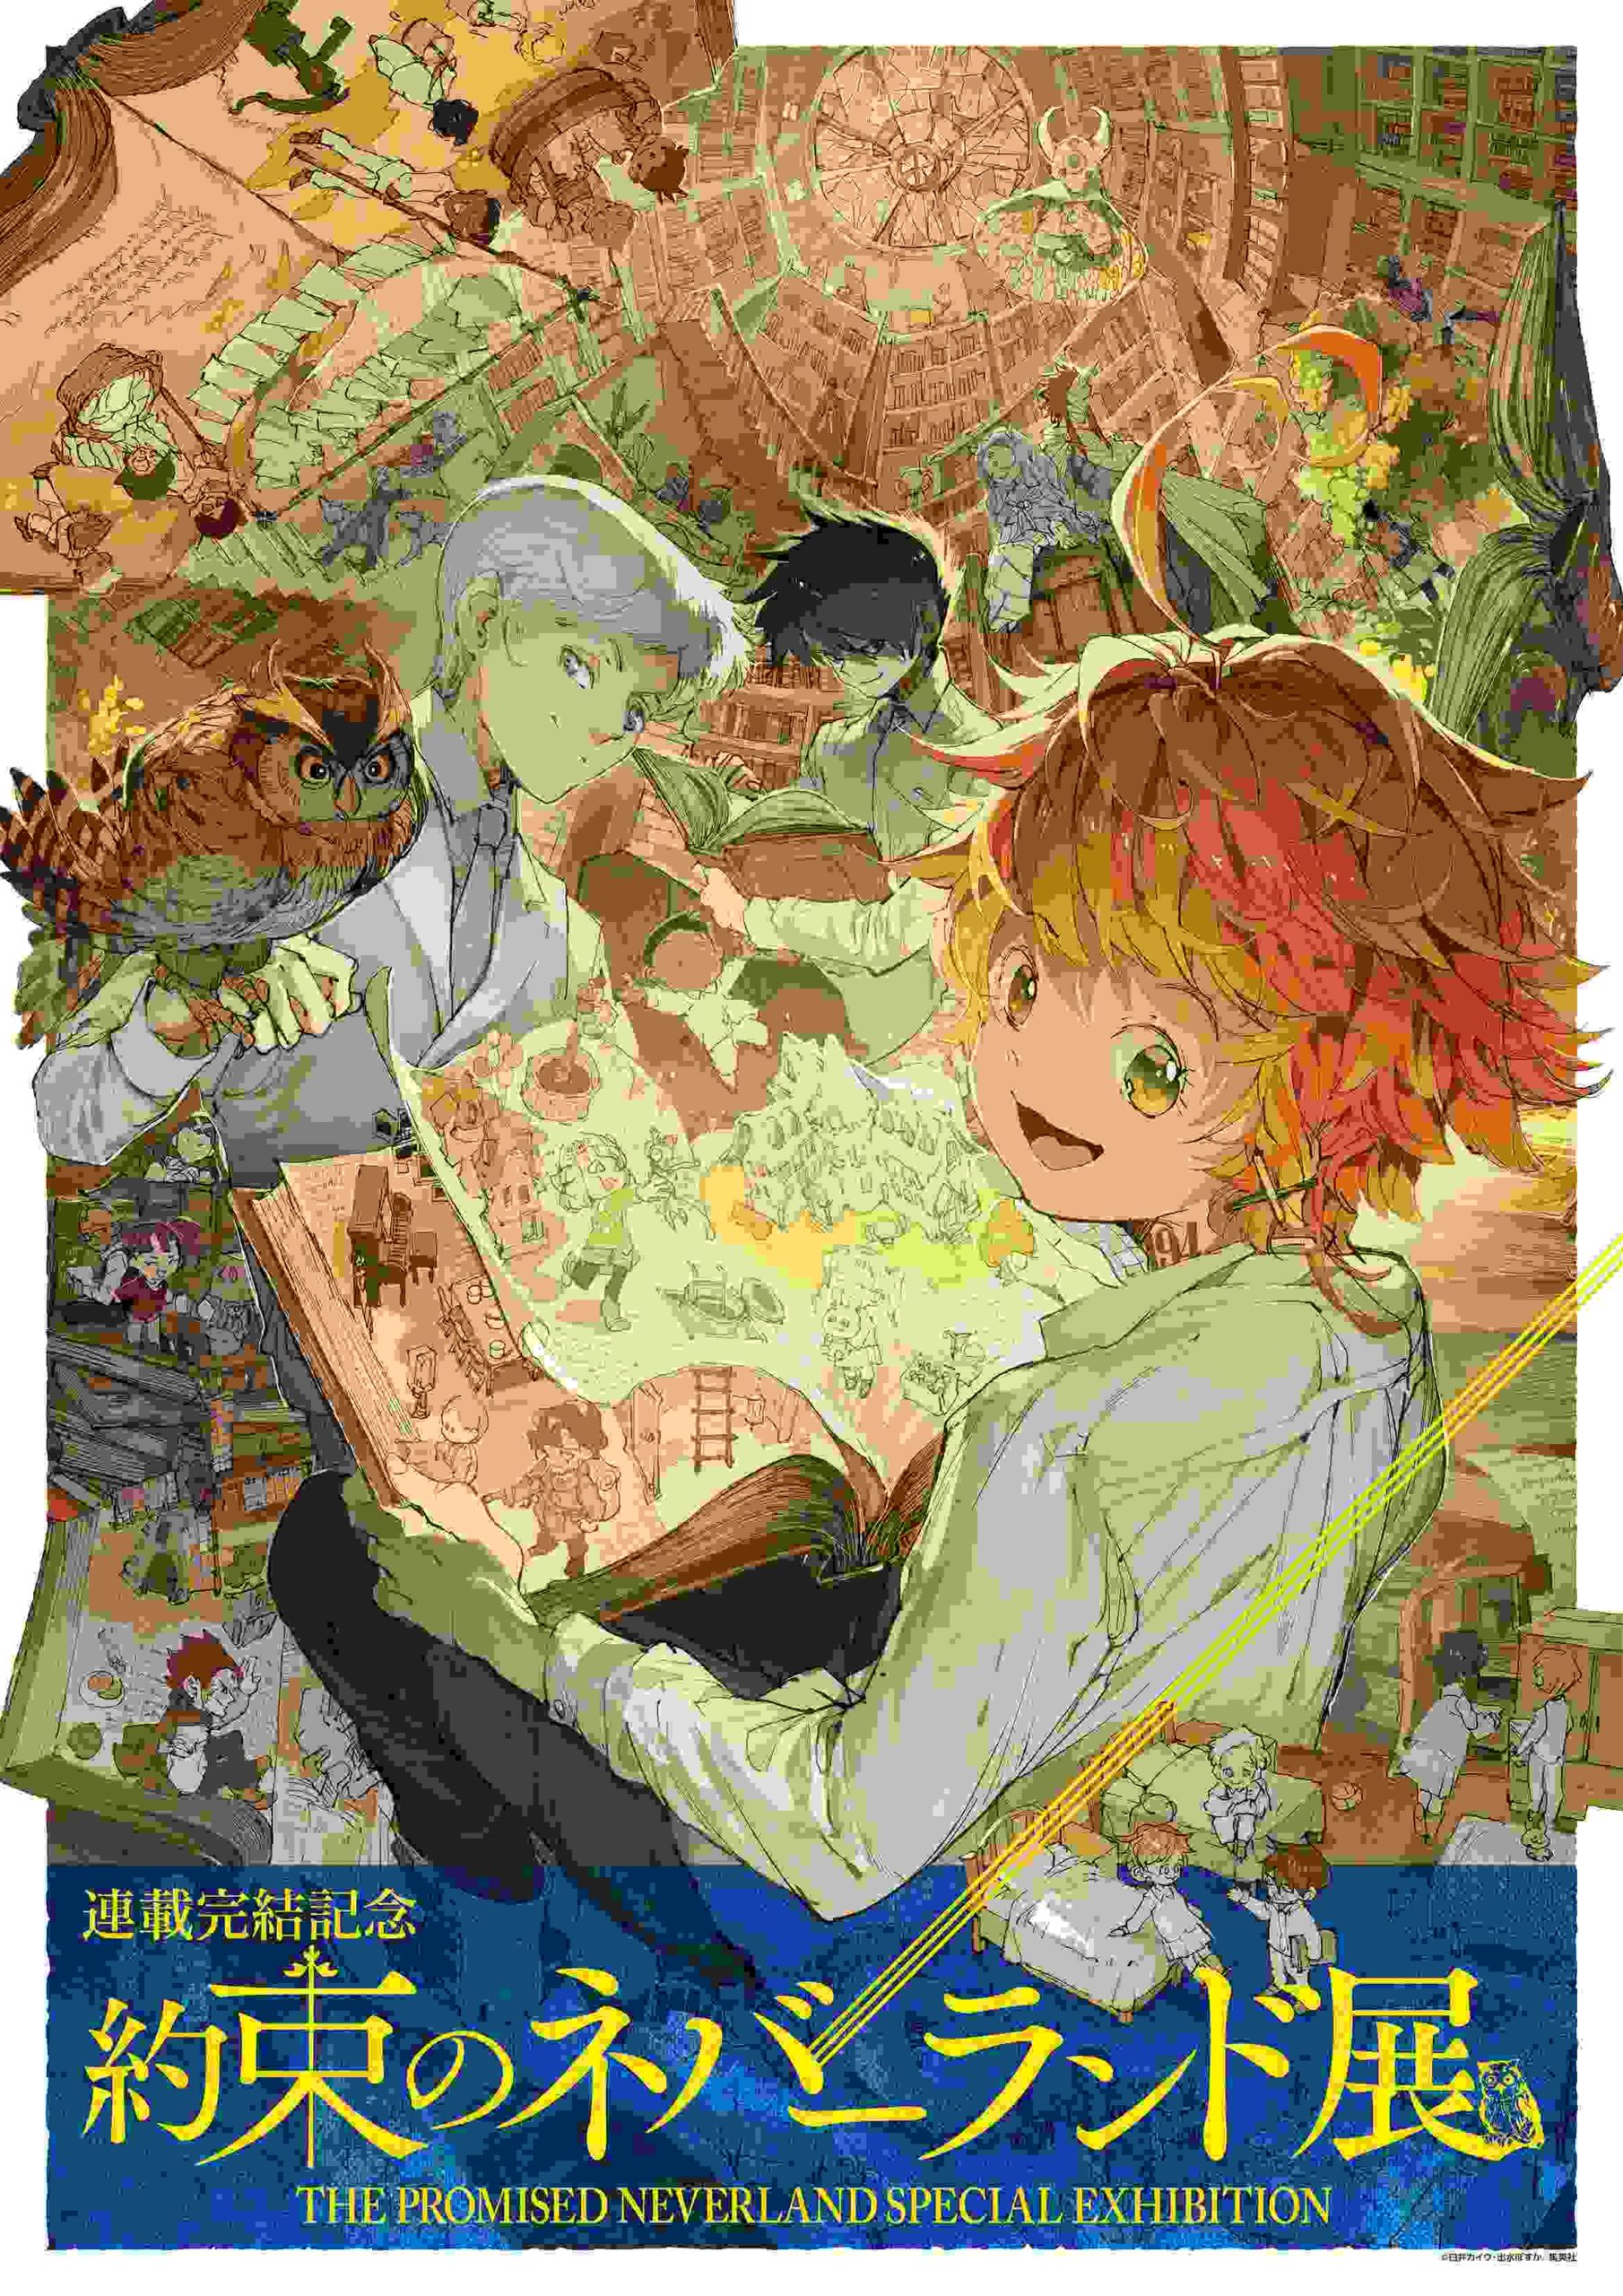 The Promised Neverland Exhibition 1 - exhibition poster